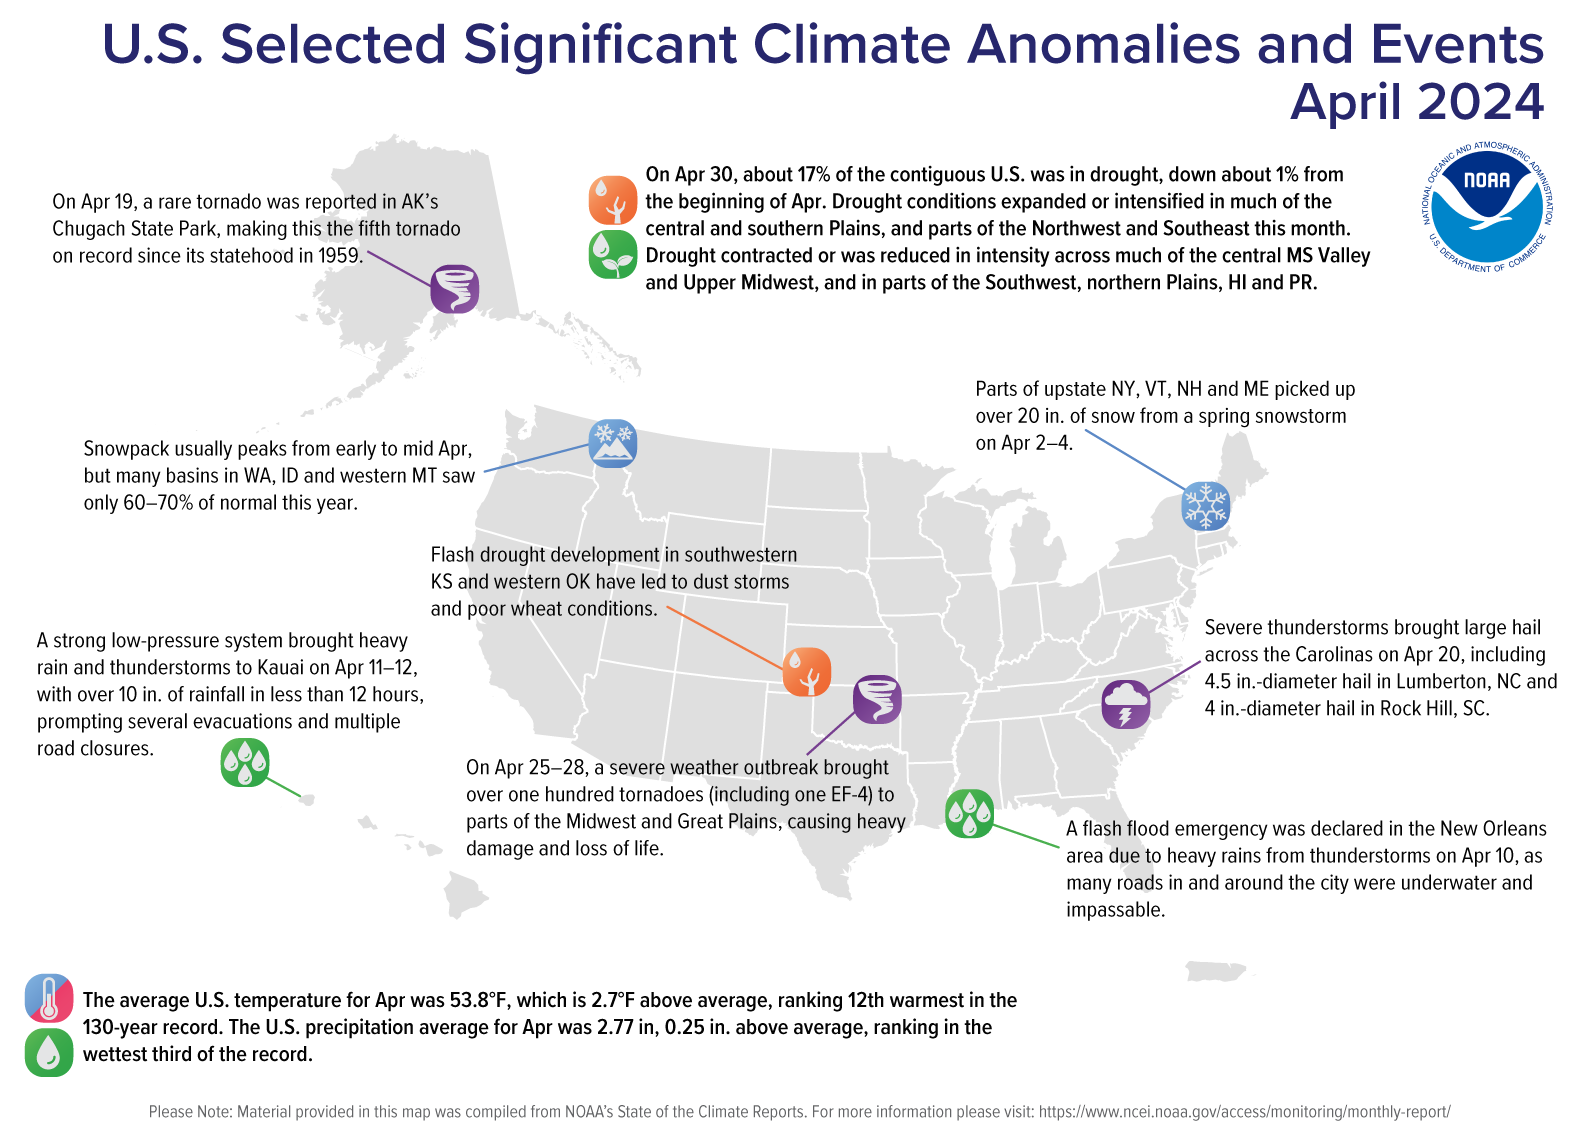 A map of the U.S. plotted with significant climate events that occurred during April 2024. Please see the story below as well as more details in the report summary from NOAA NCEI at  http://bit.ly/USClimate202404.